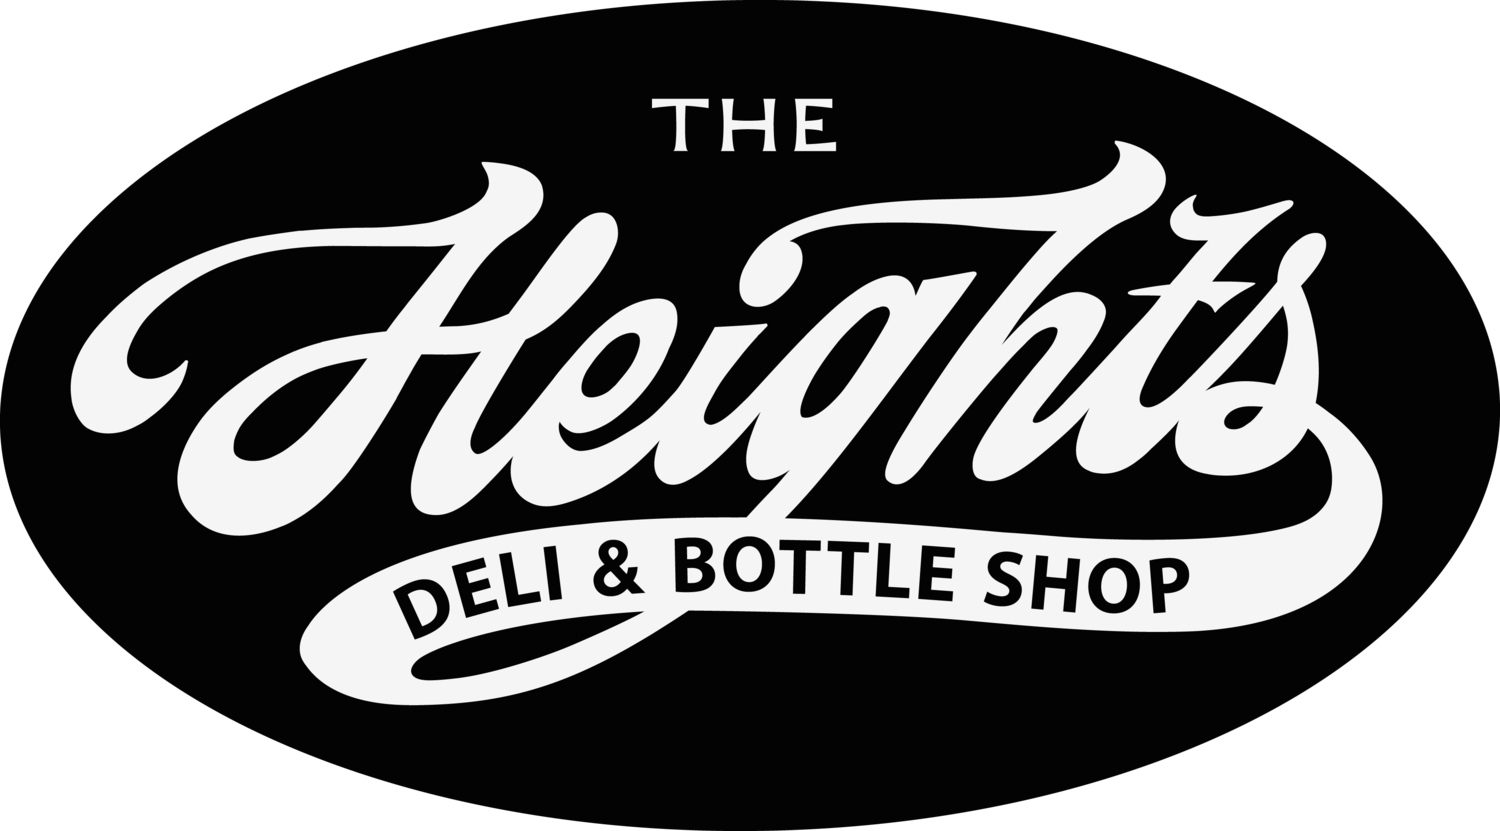 Location & Contact Info — The Heights Deli & Bottle Shop Logo